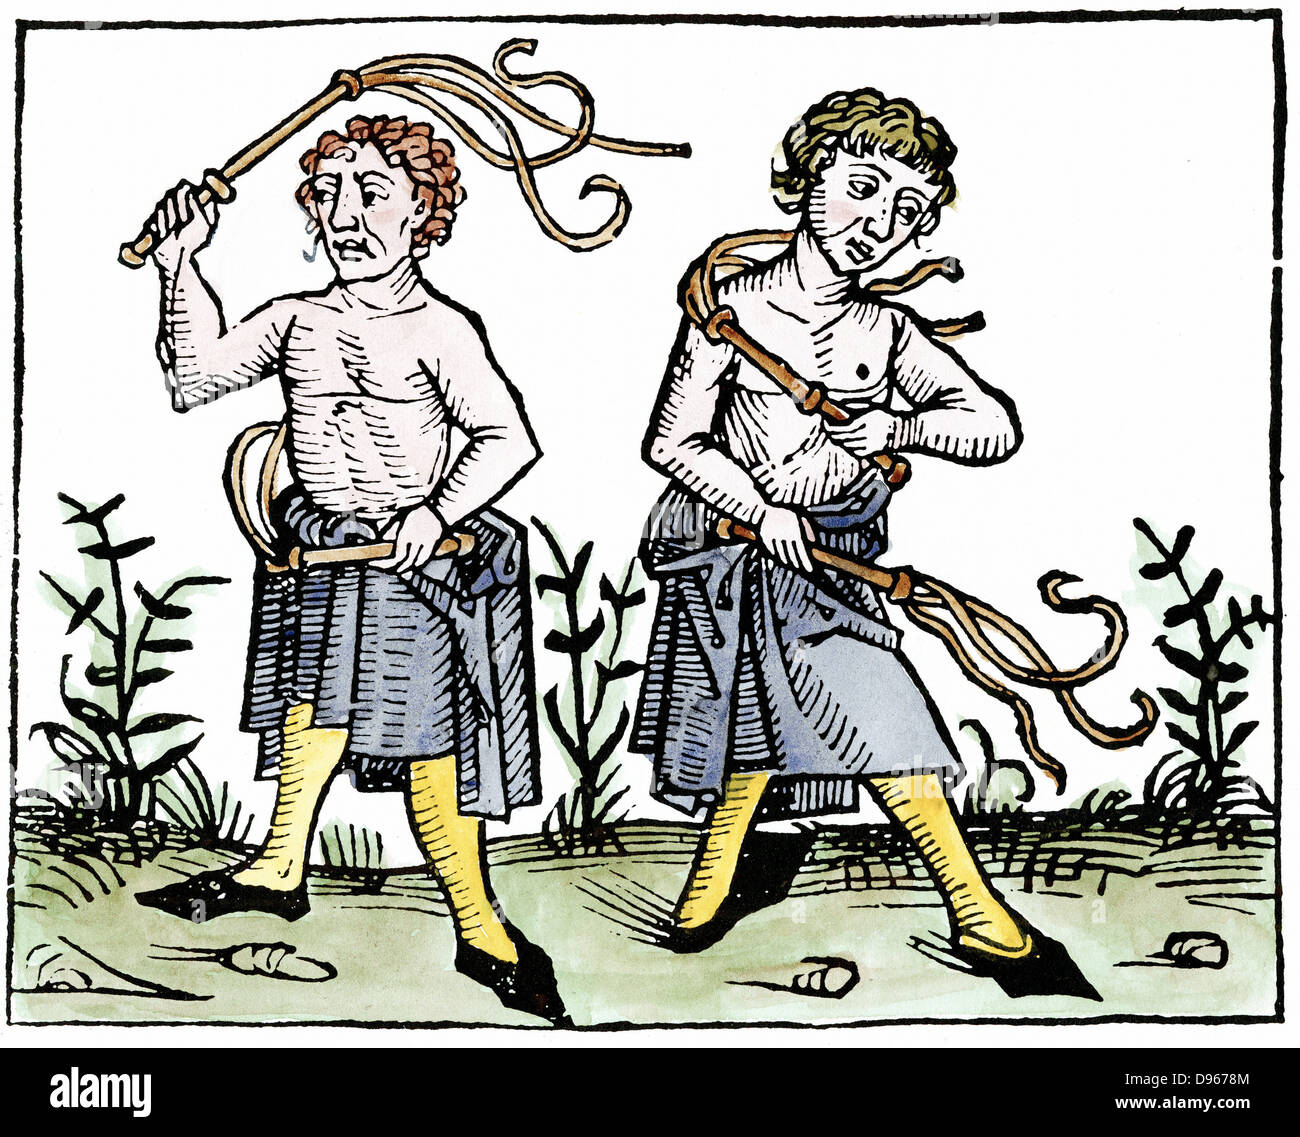 Flagellants. At time of Black Death in Europe, sect went through streets scourging themselves in attempt to take sins of population on themselves and save them from God's wrath manifested in form of plague. Woodcut 1493 Stock Photo